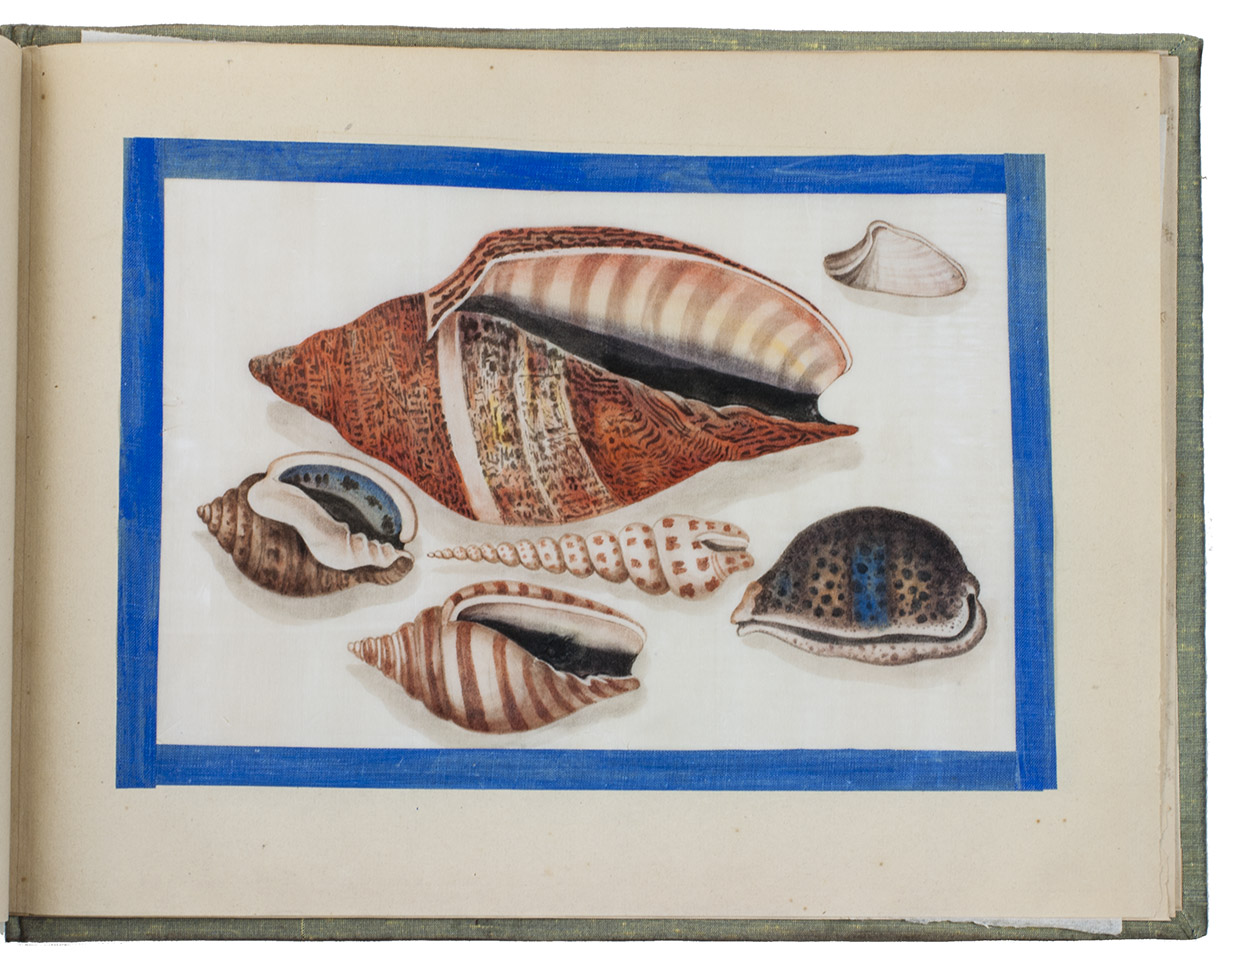 [SUNQUA?]. - [Chinese fish and seashells].[Guangzhen (Canton)?, Sunqua?, ca. 1845/55?]. Oblong folio album (26.5 x 34.5 cm). 14 drawings depicting 72 fish and seashells in coloured gouaches, the fish with gold and silver speckles to give a metallic effect to the scales, executed on pith paper (18 x 29 cm), framed with 4 strips of blue silk, and with a loose tissue leaf inserted before each drawing. Contemporary boards, covered with yellow-green silk.